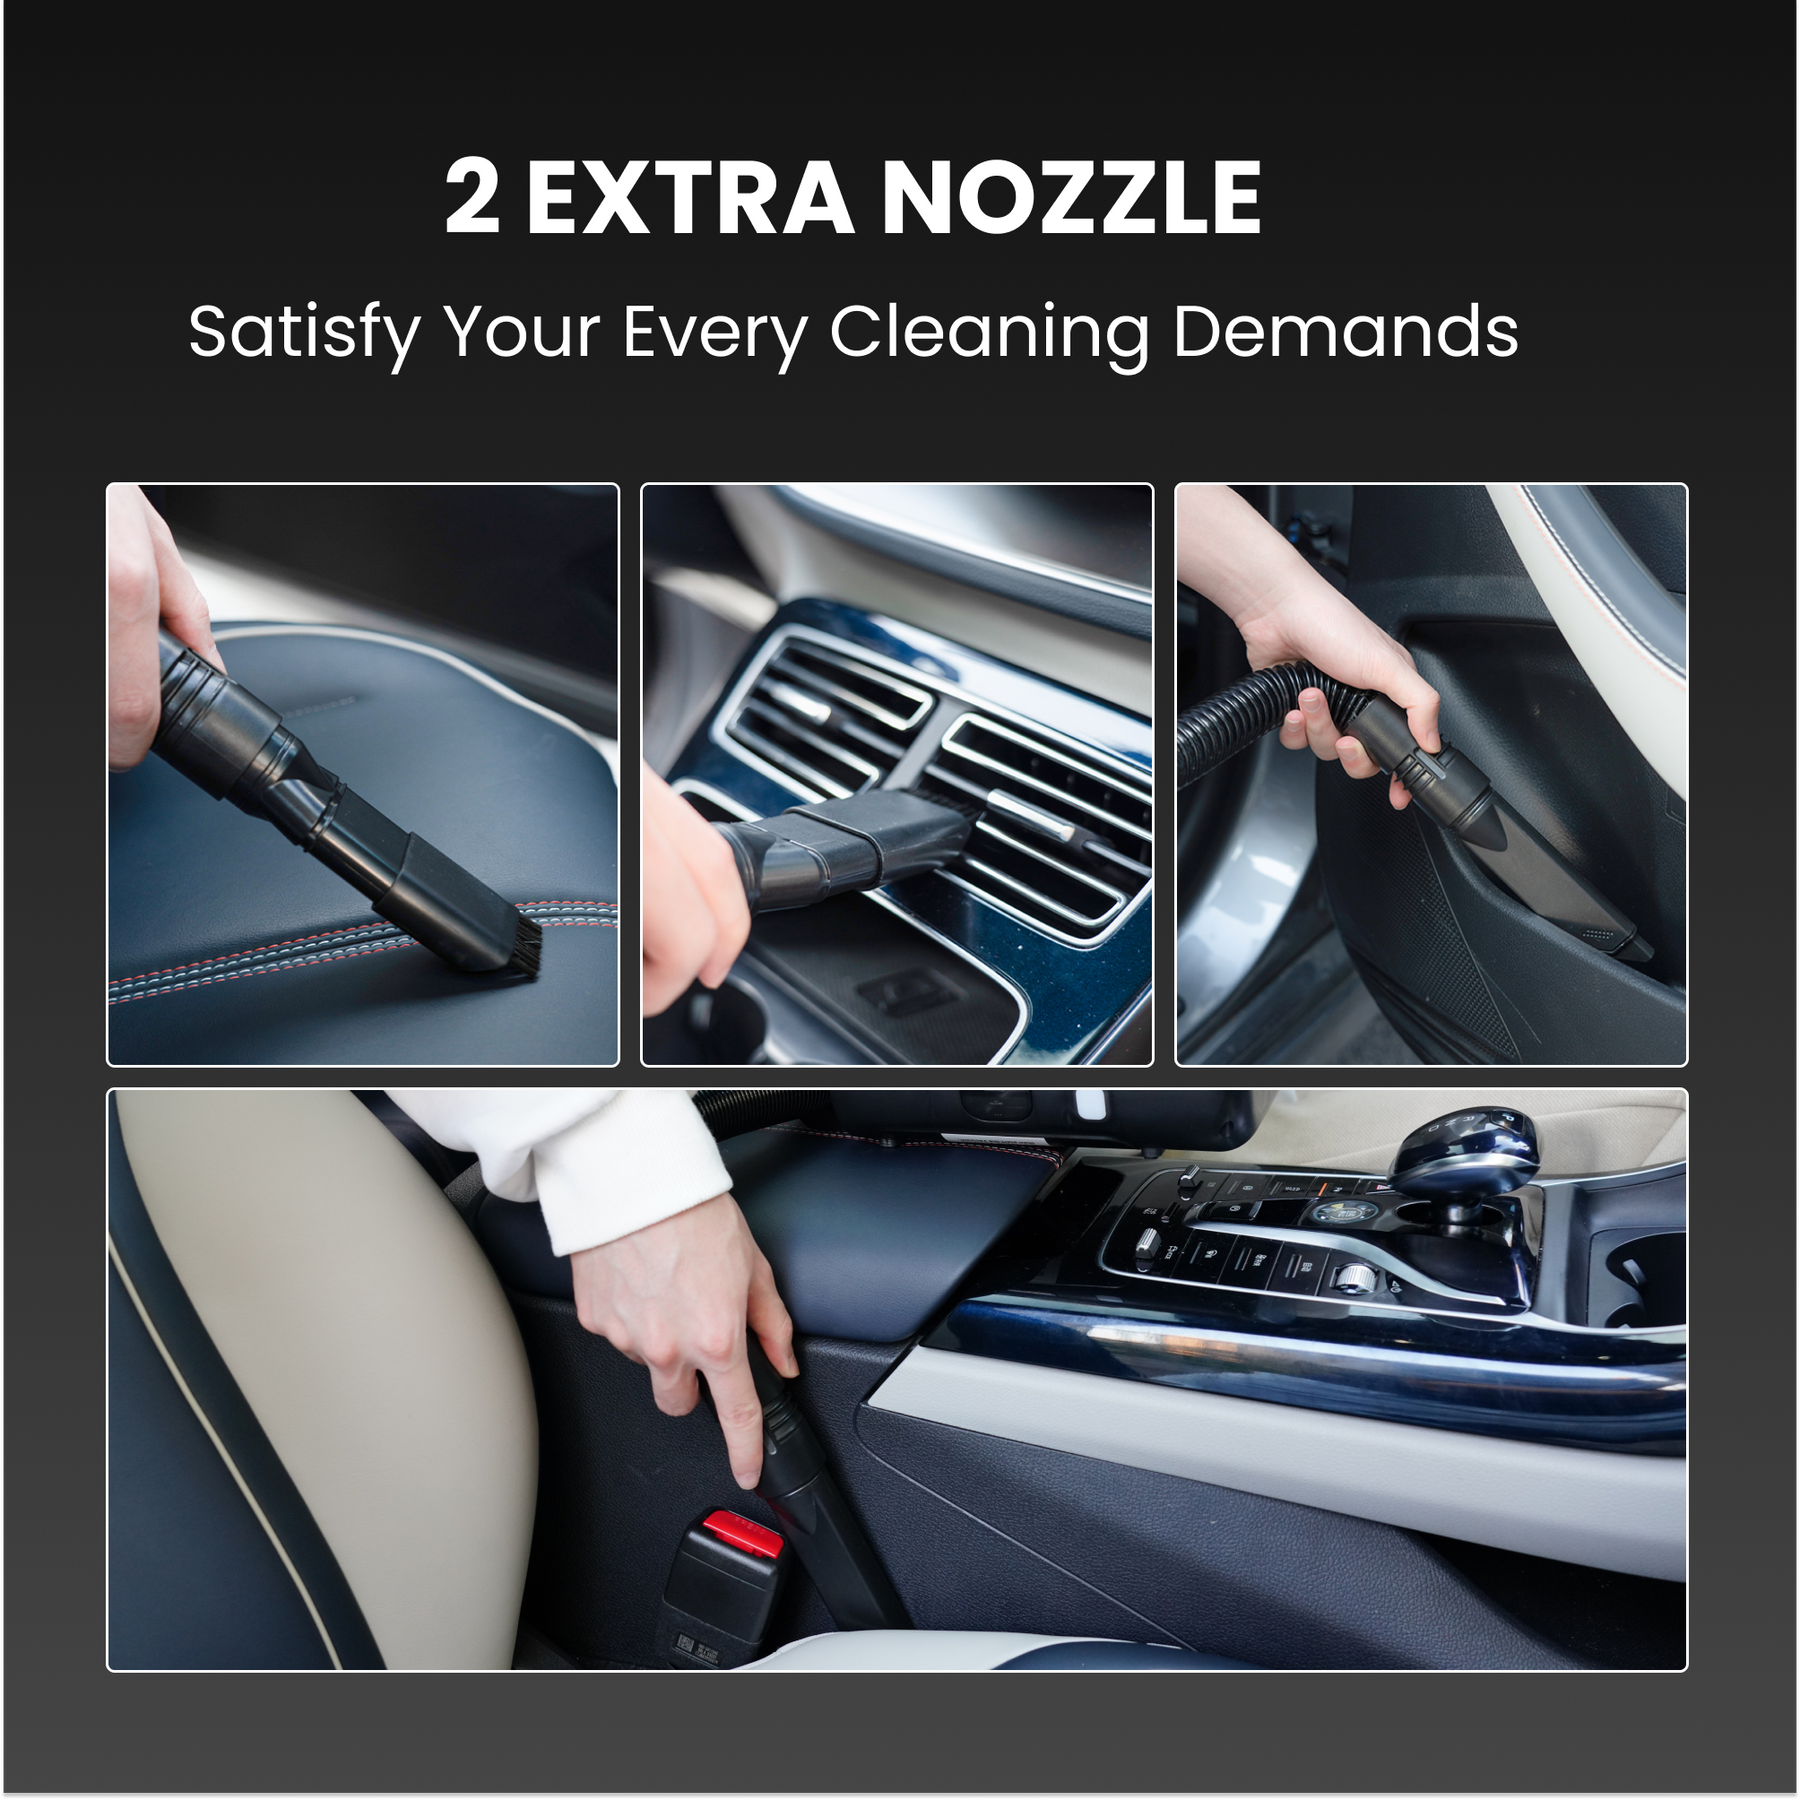 Keep Cars Immaculate with Car Vacuum Cleaner and Car Upholstery